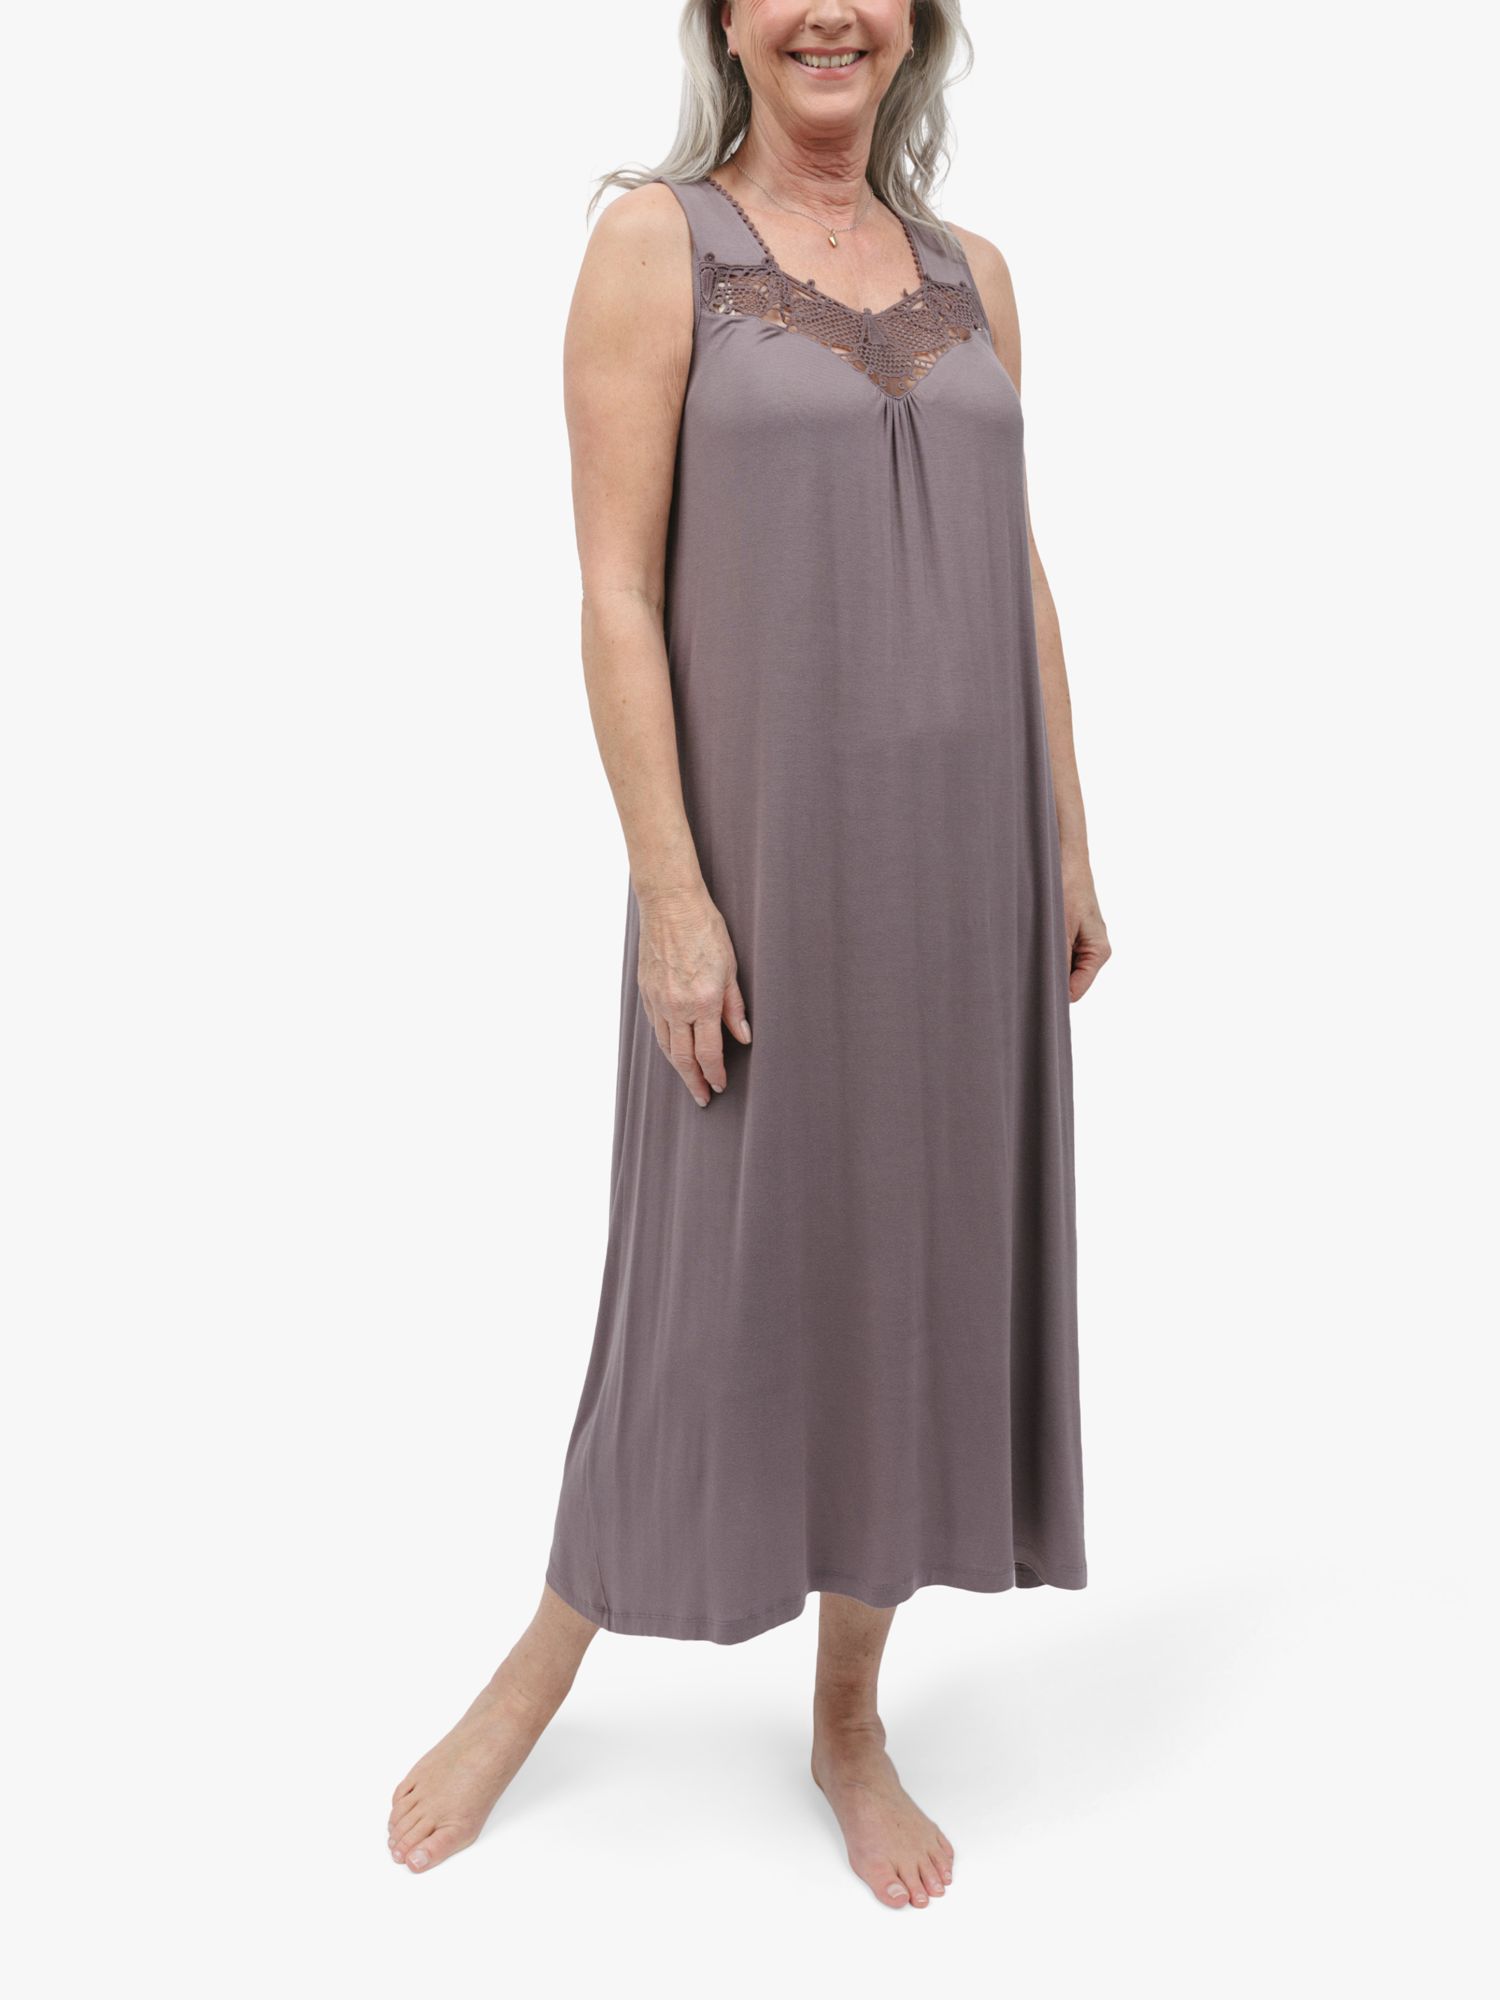 Buy Nora Rose by Cyberjammies Evette Lace Neck Long Nightdress, Taupe Online at johnlewis.com